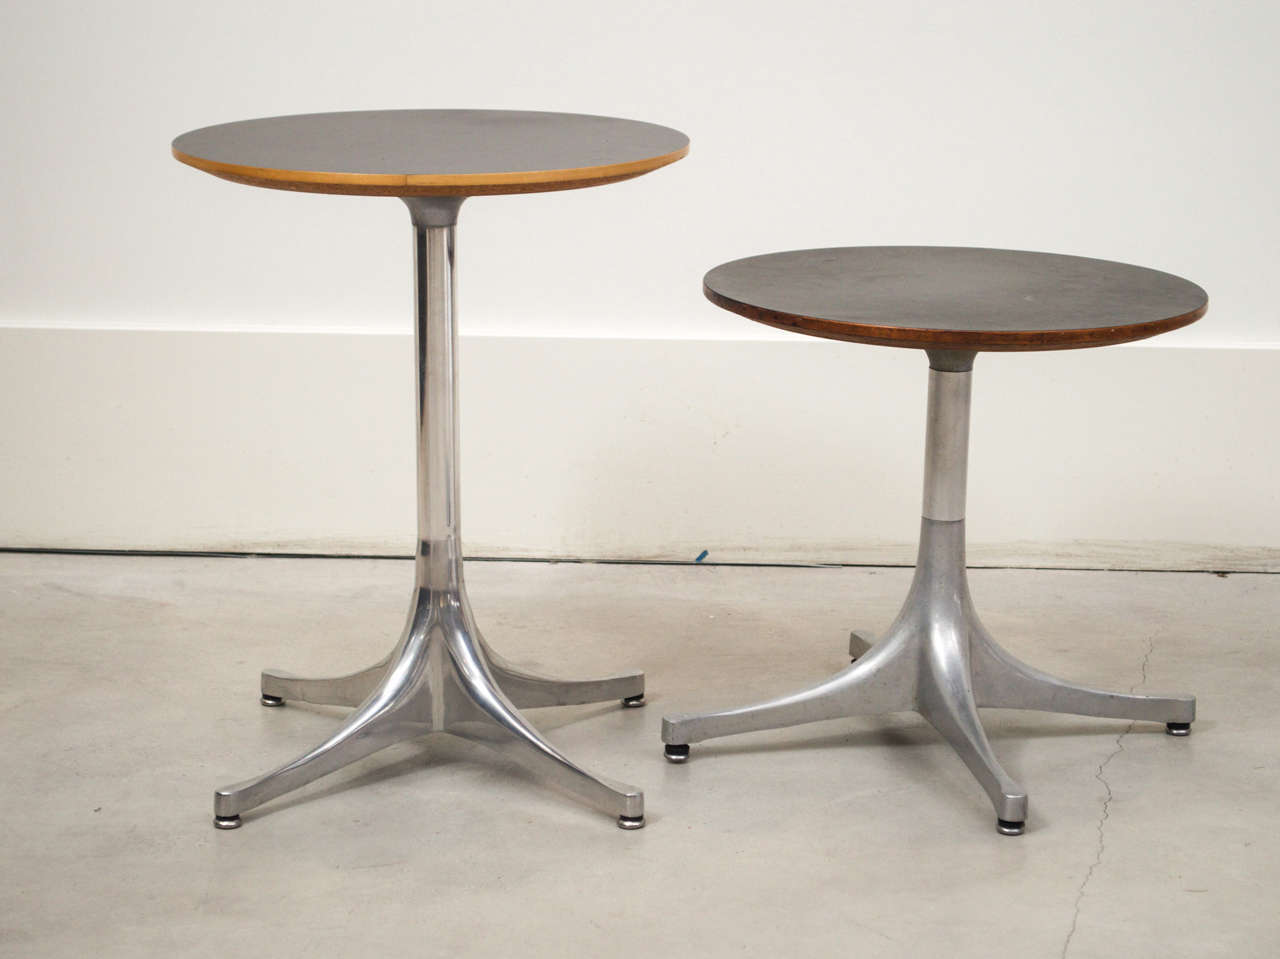 Two black side tables by George Nelson for Herman Miller. Features a micarta top and wood trim on an aluminum swag leg base.